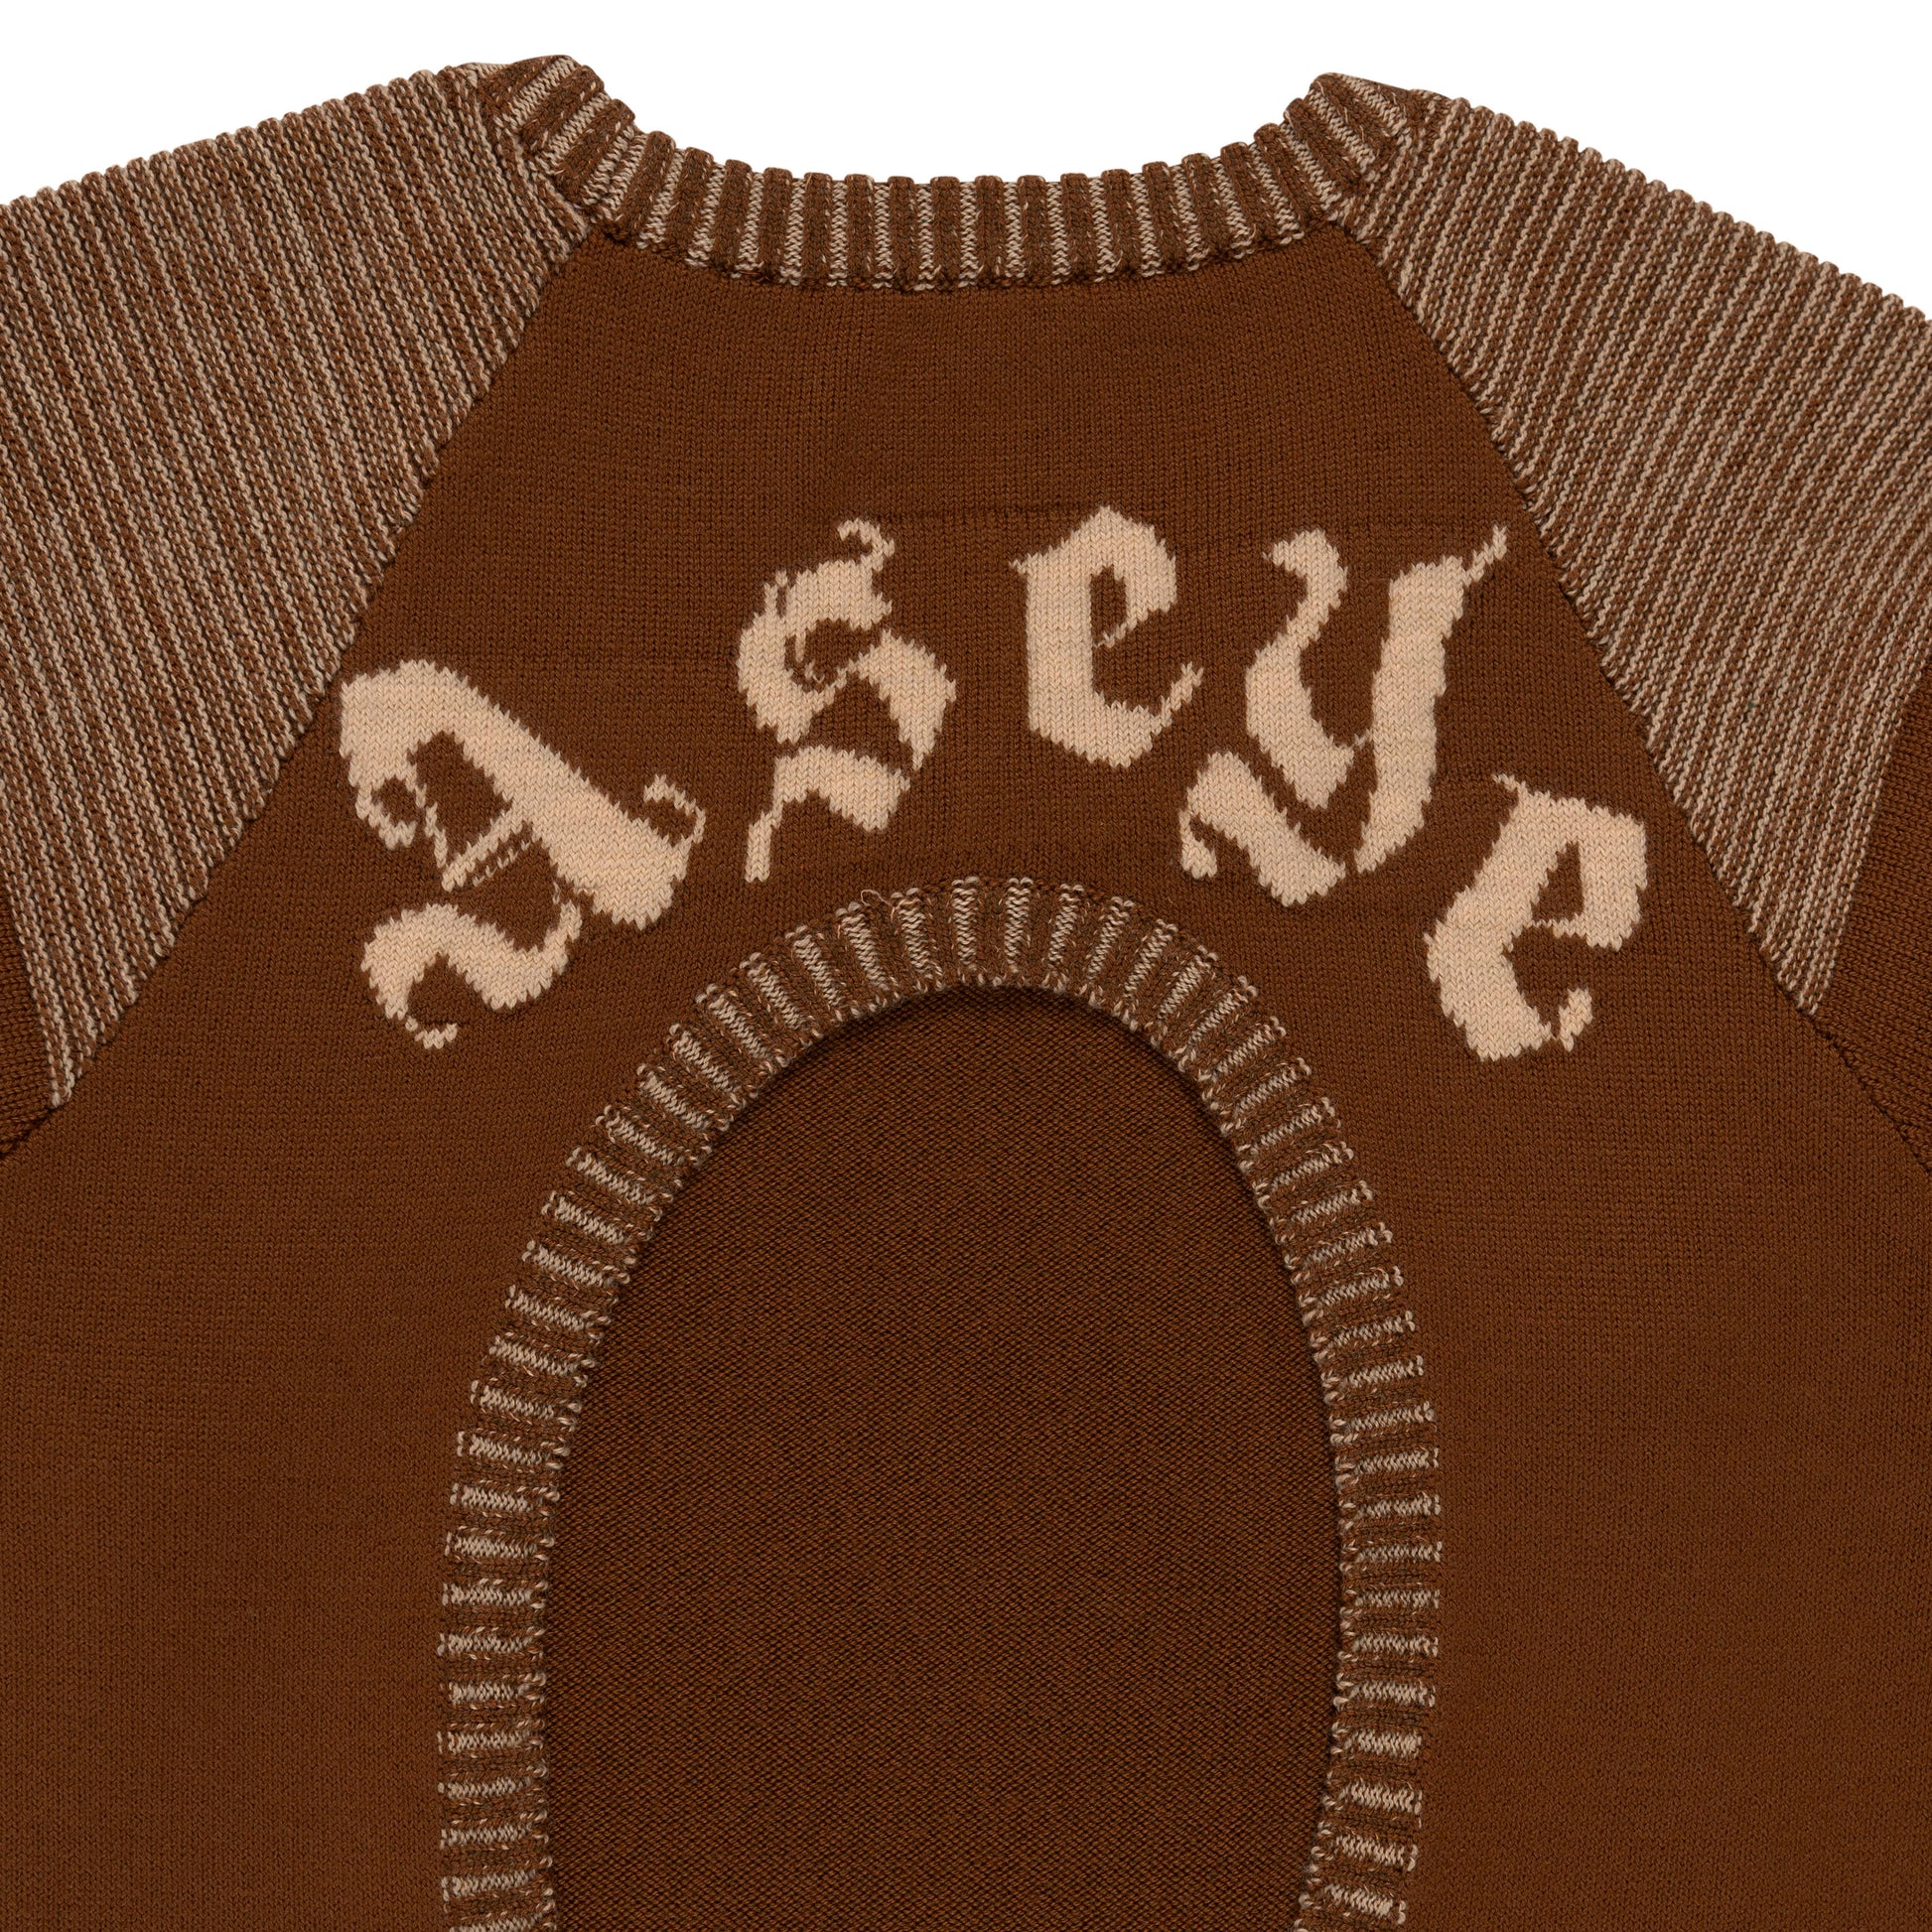 Detail View of Blended Ribbing and Intarsia 'Aseye' on back of Lola Open Back Dress by Aseye Studio